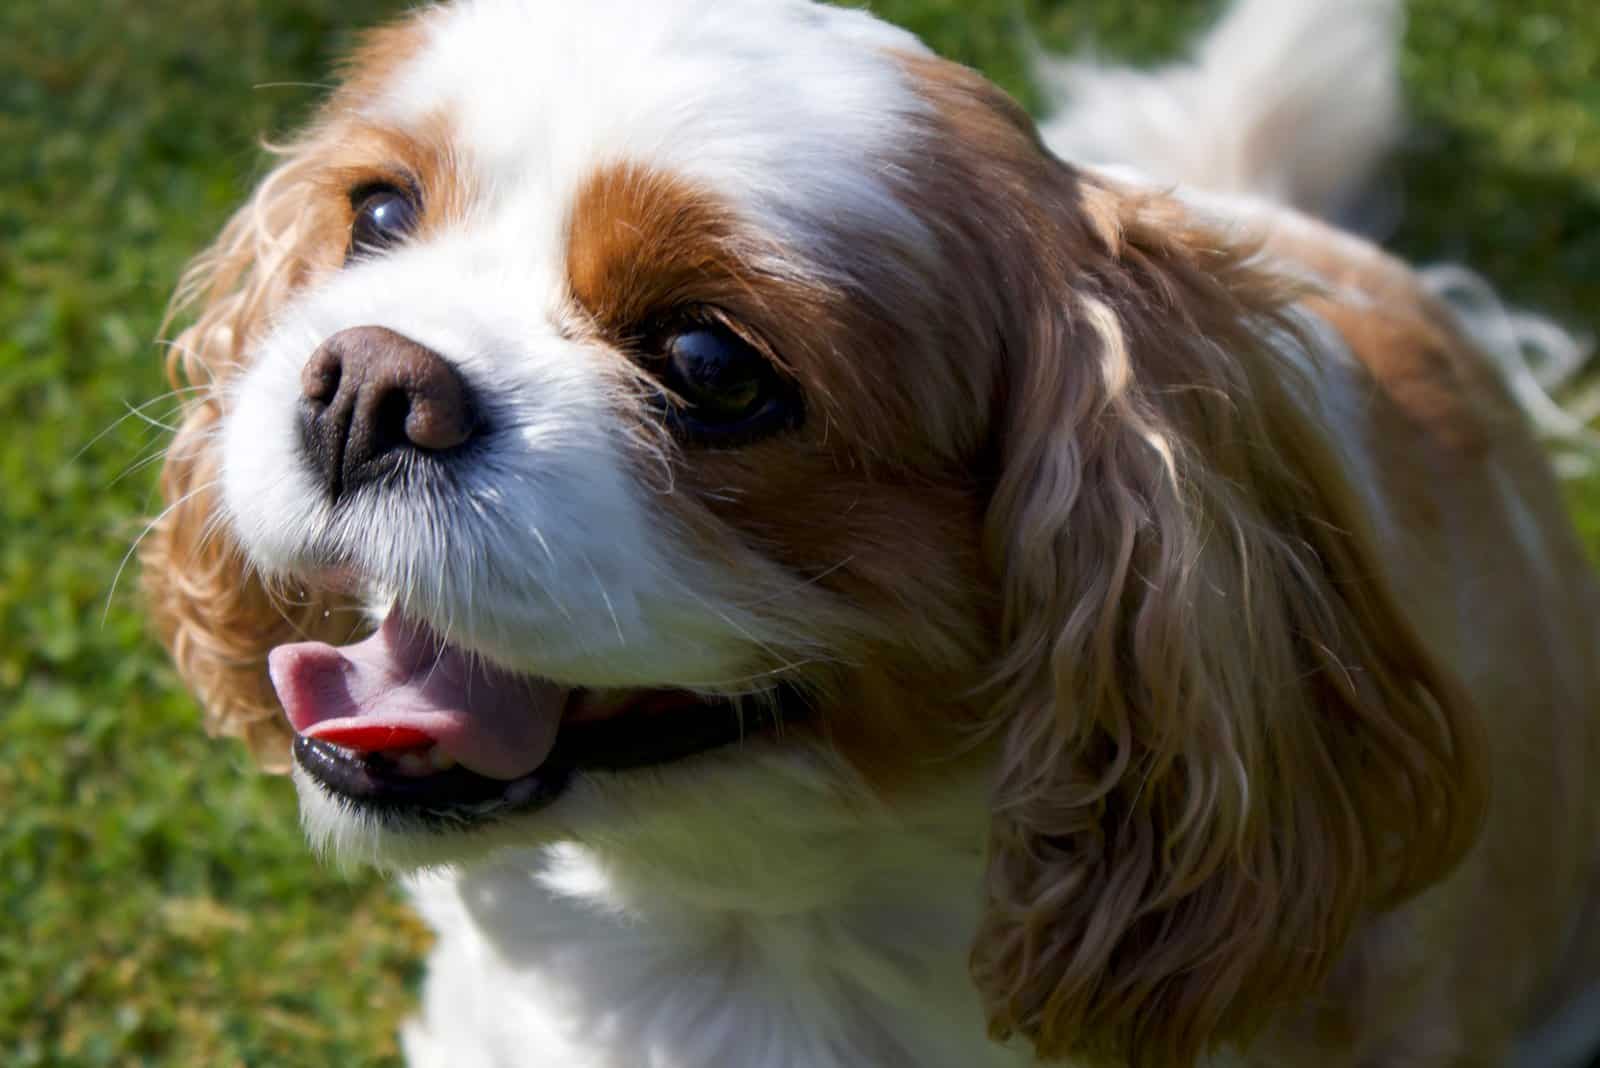 Cavalier King Charles Spaniels looks at the camera